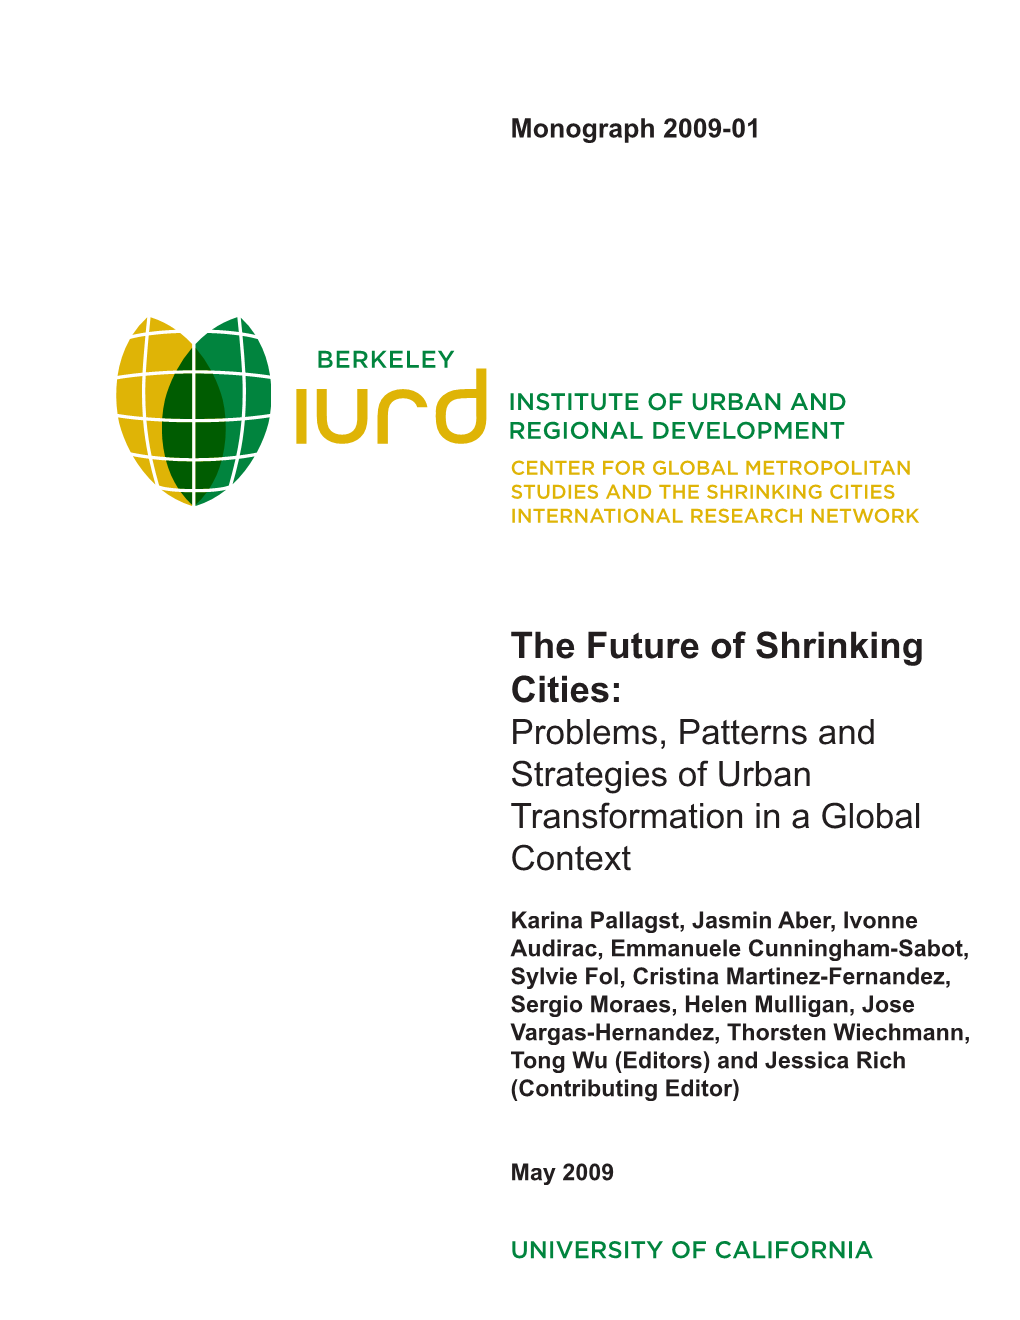 The Future of Shrinking Cities: Problems, Patterns and Strategies of Urban Transformation in a Global Context